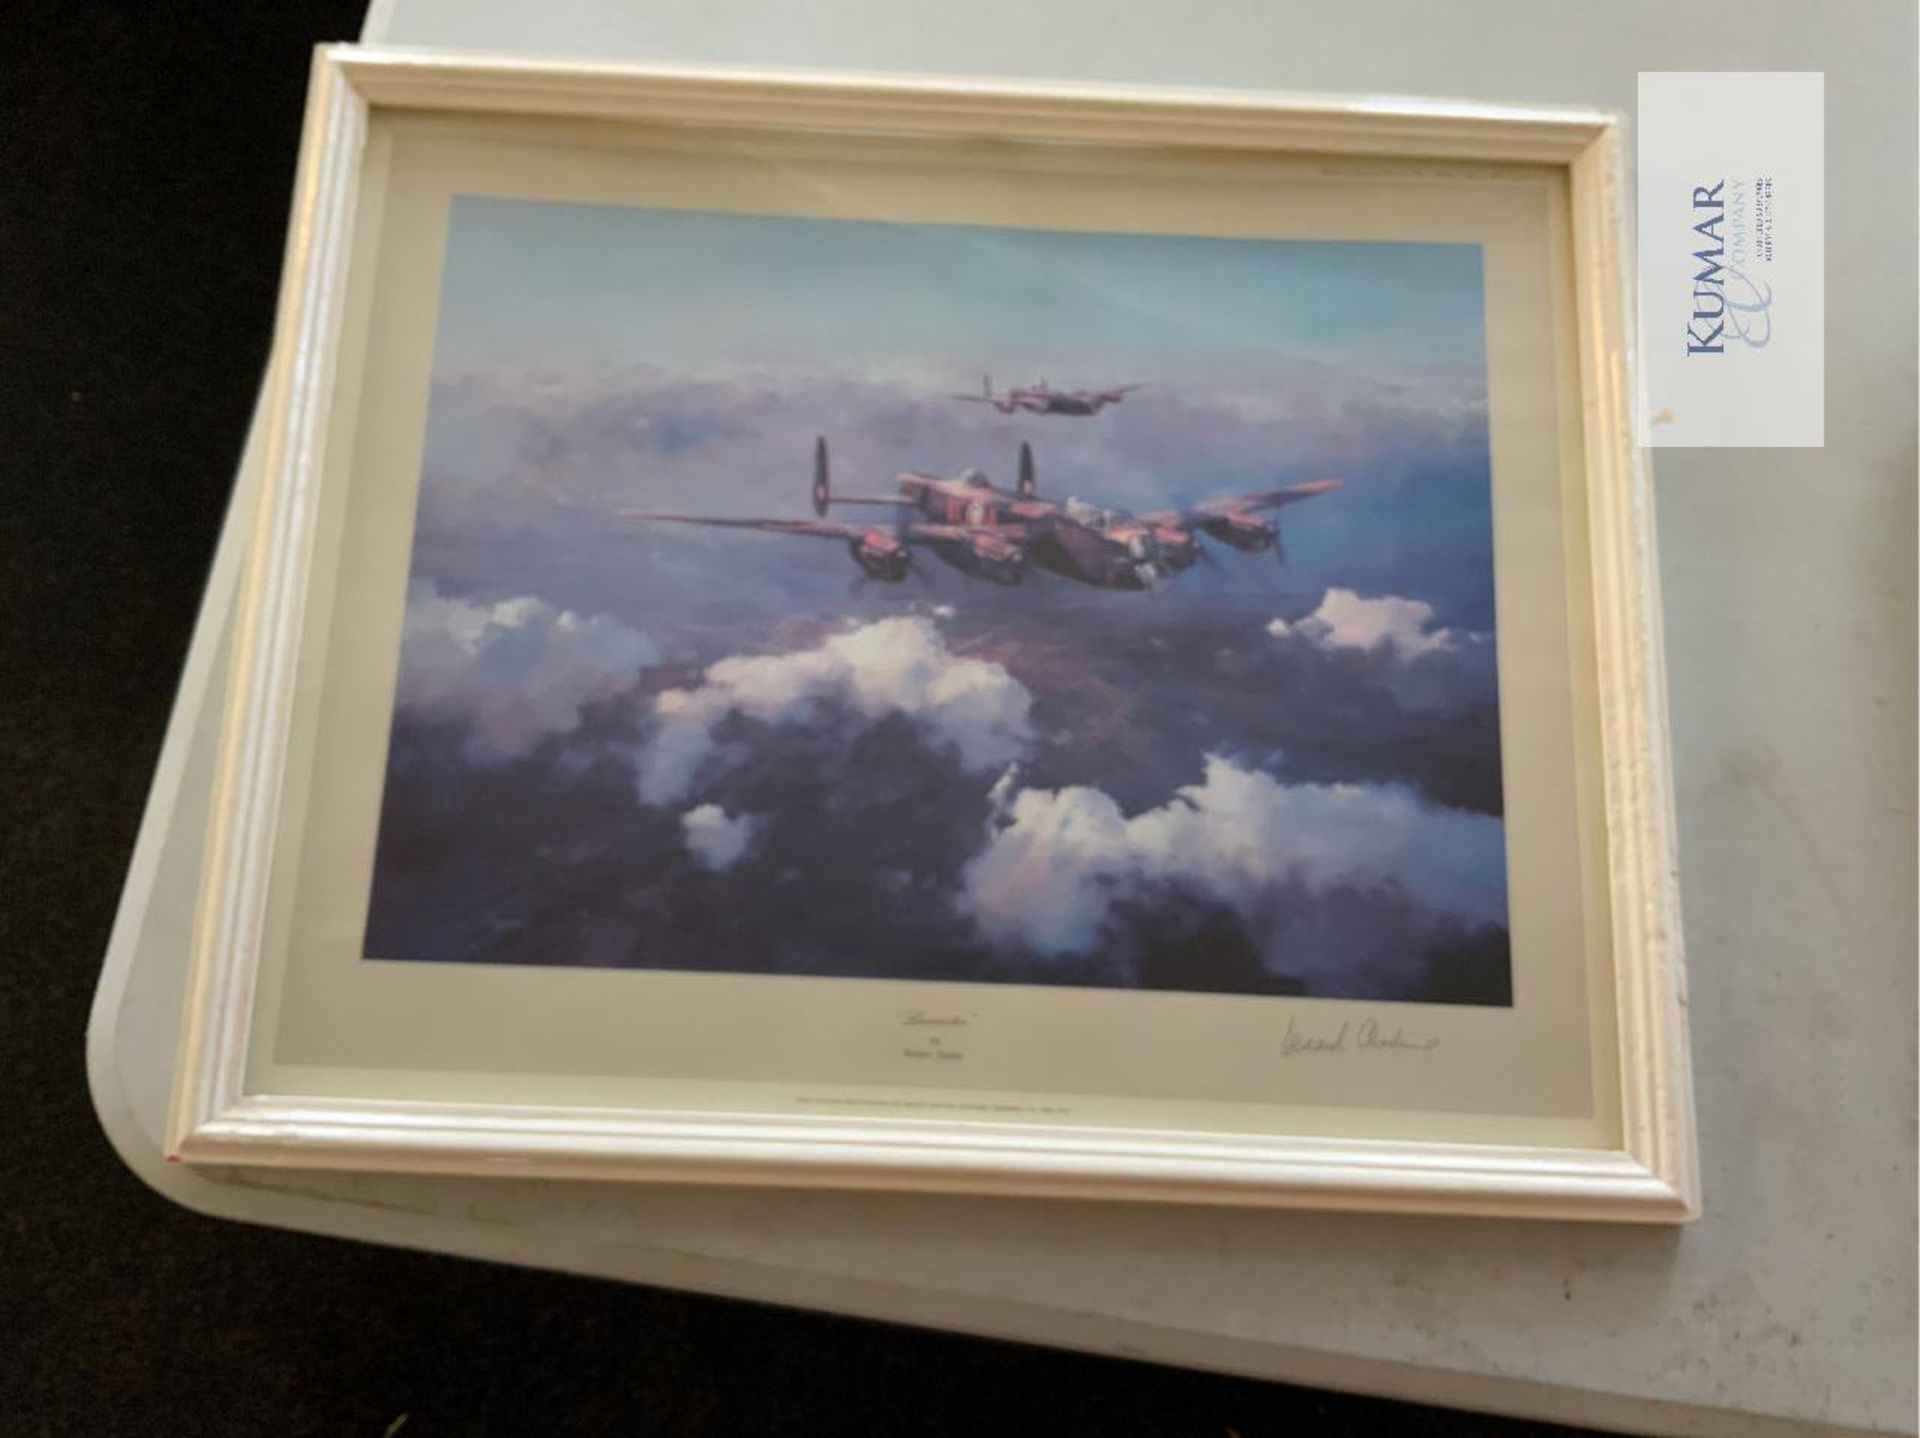 4: Various Pictures, Paintings, Drawings Etc - Including Lancaster by Robert Taylor, First Edition - Image 4 of 13